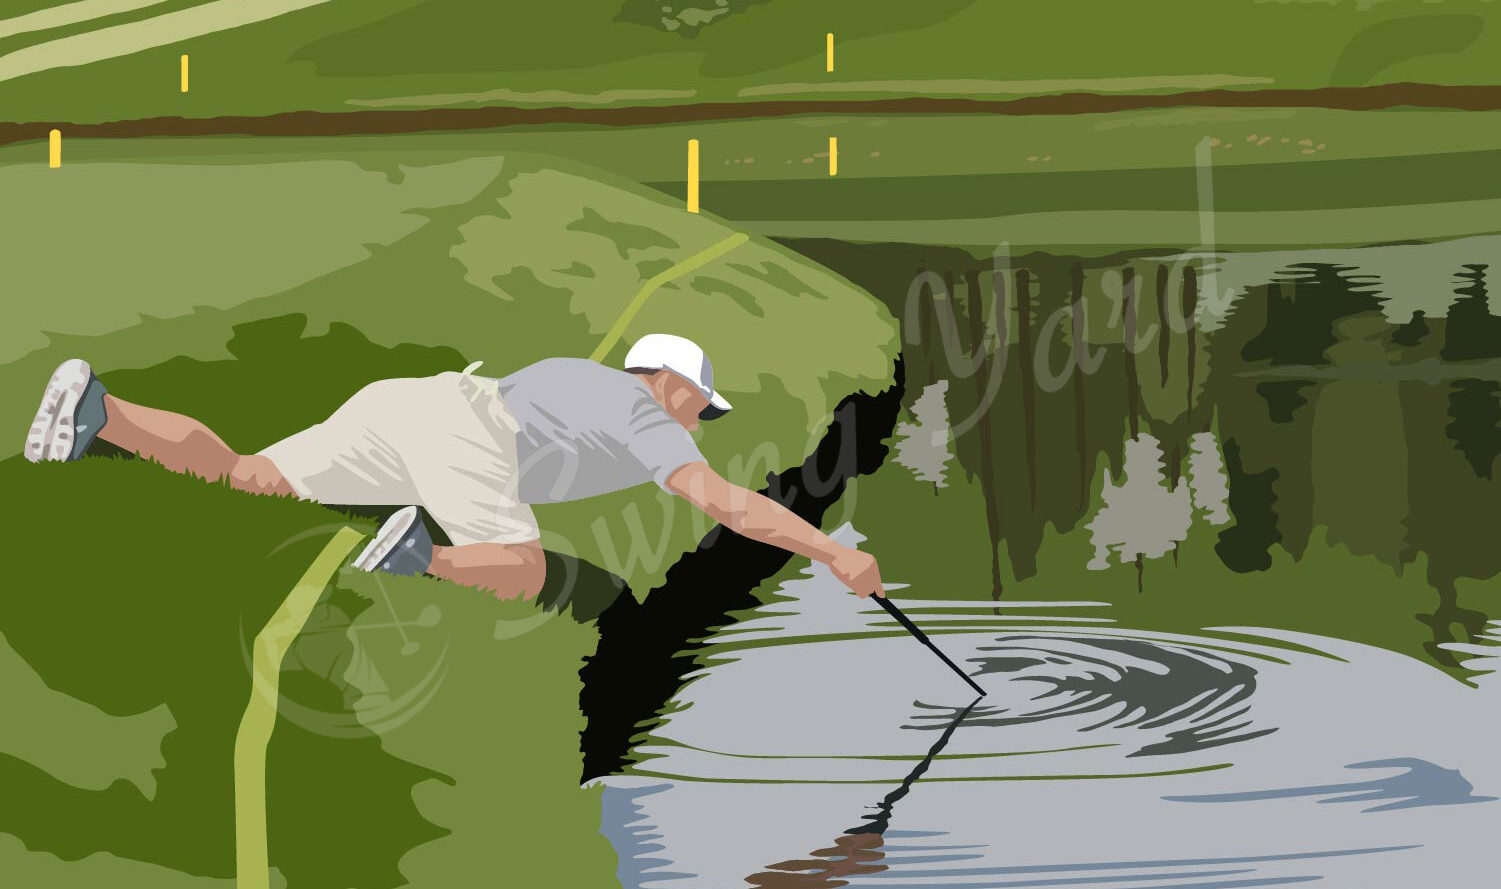 A golfer trying to use a golf ball retriever in a pond